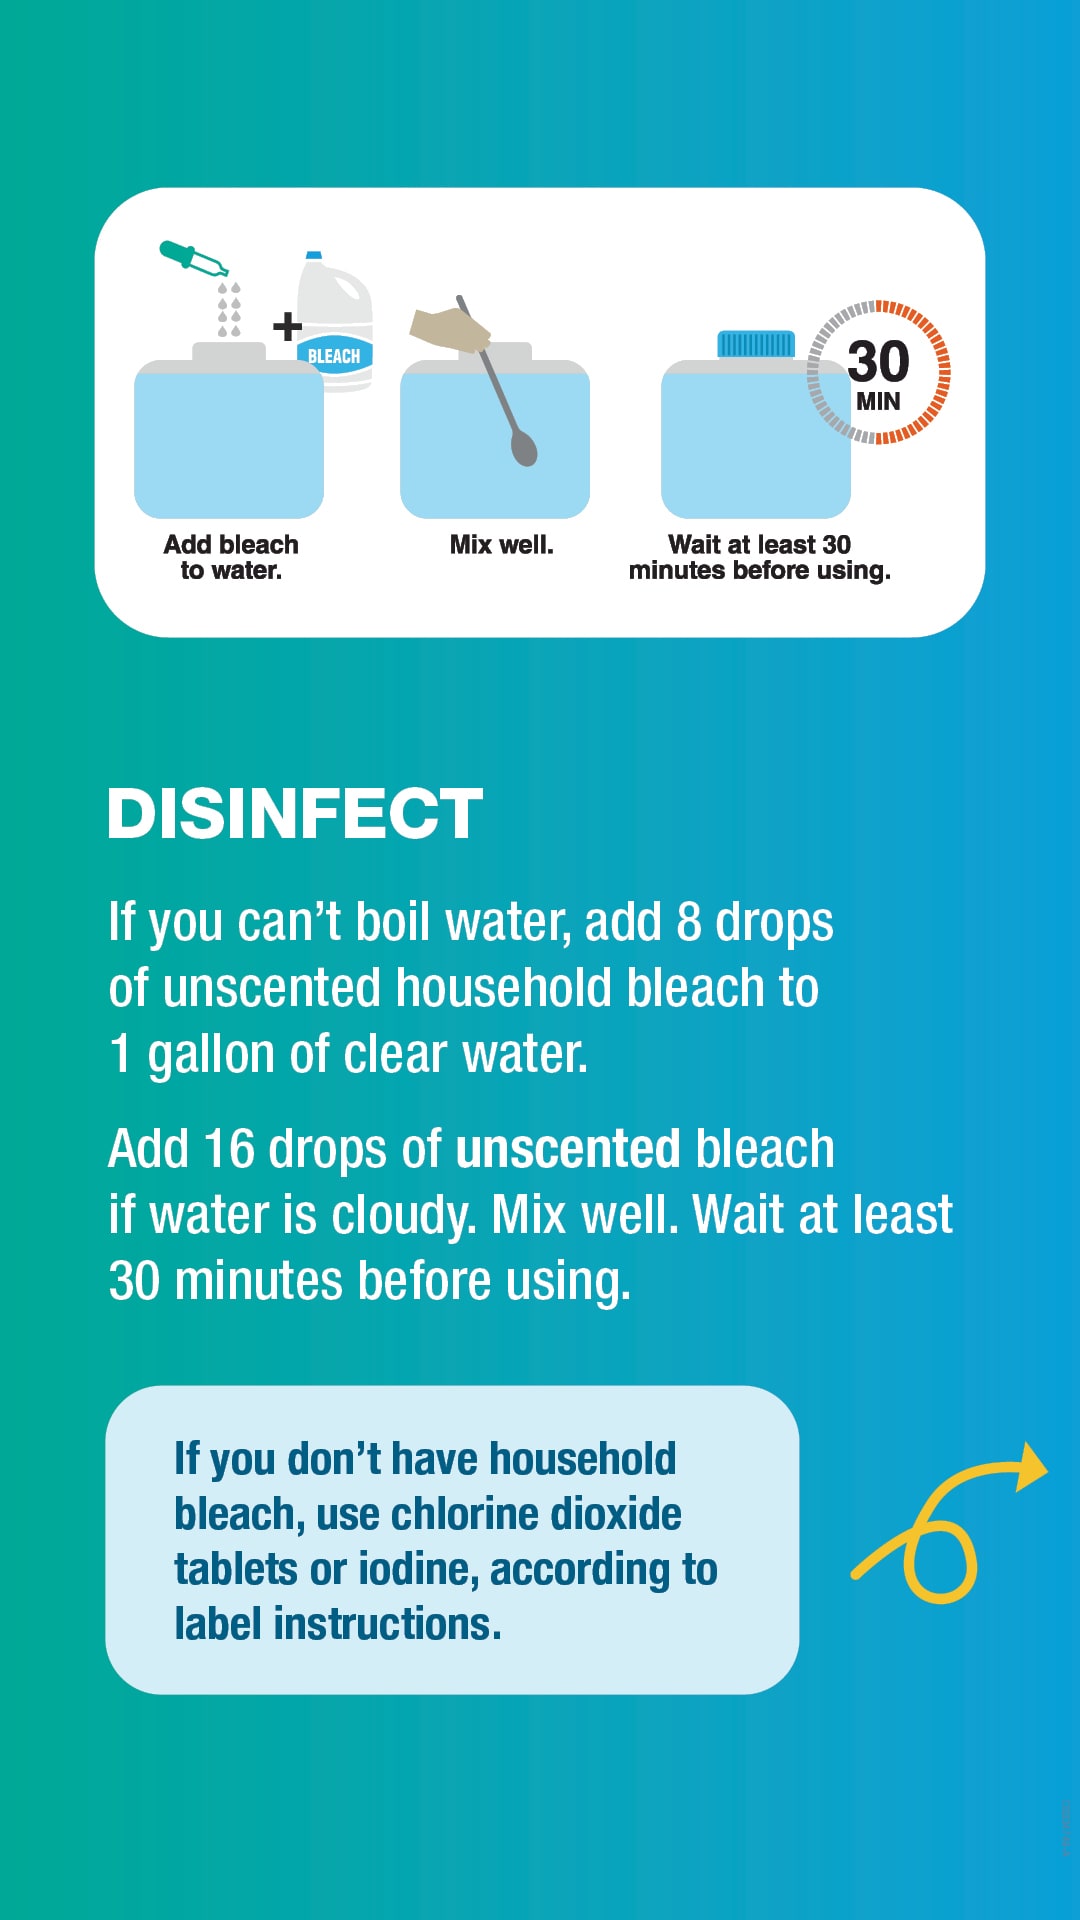 Make Water Safe: Disinfect - for Facebook